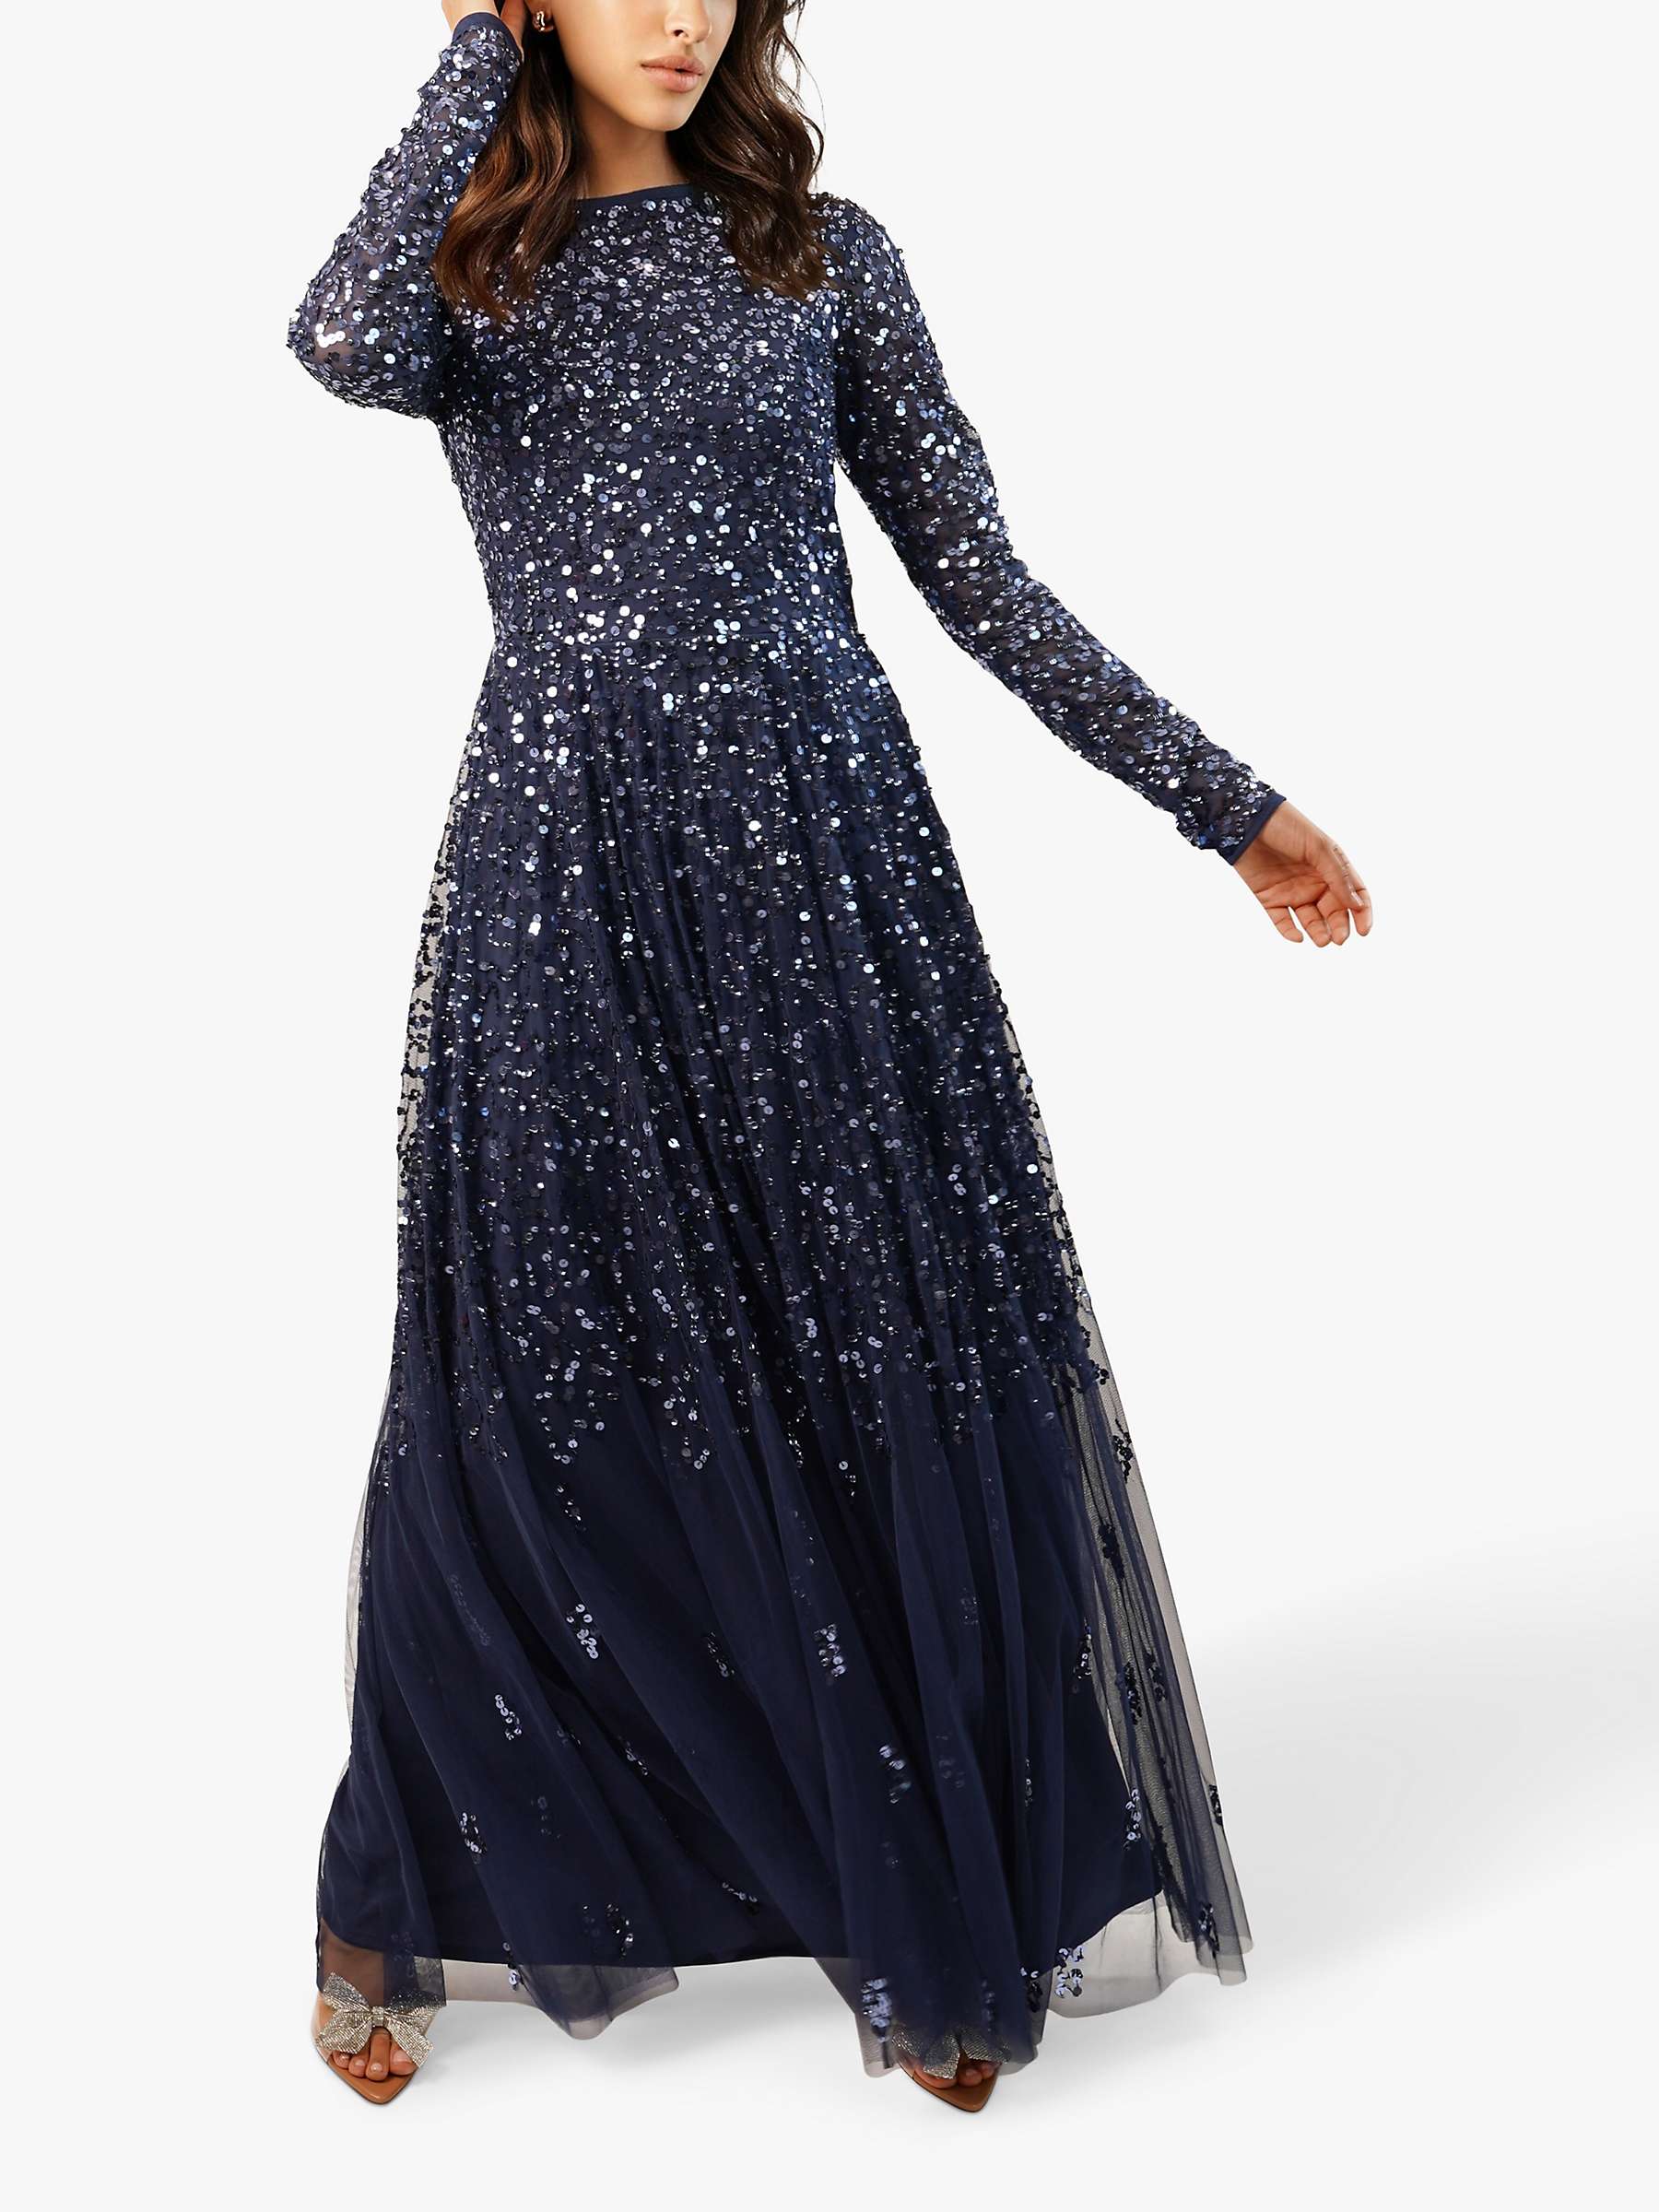 Buy Lace & Beads Sila Embellished Maxi Dress, Navy Online at johnlewis.com